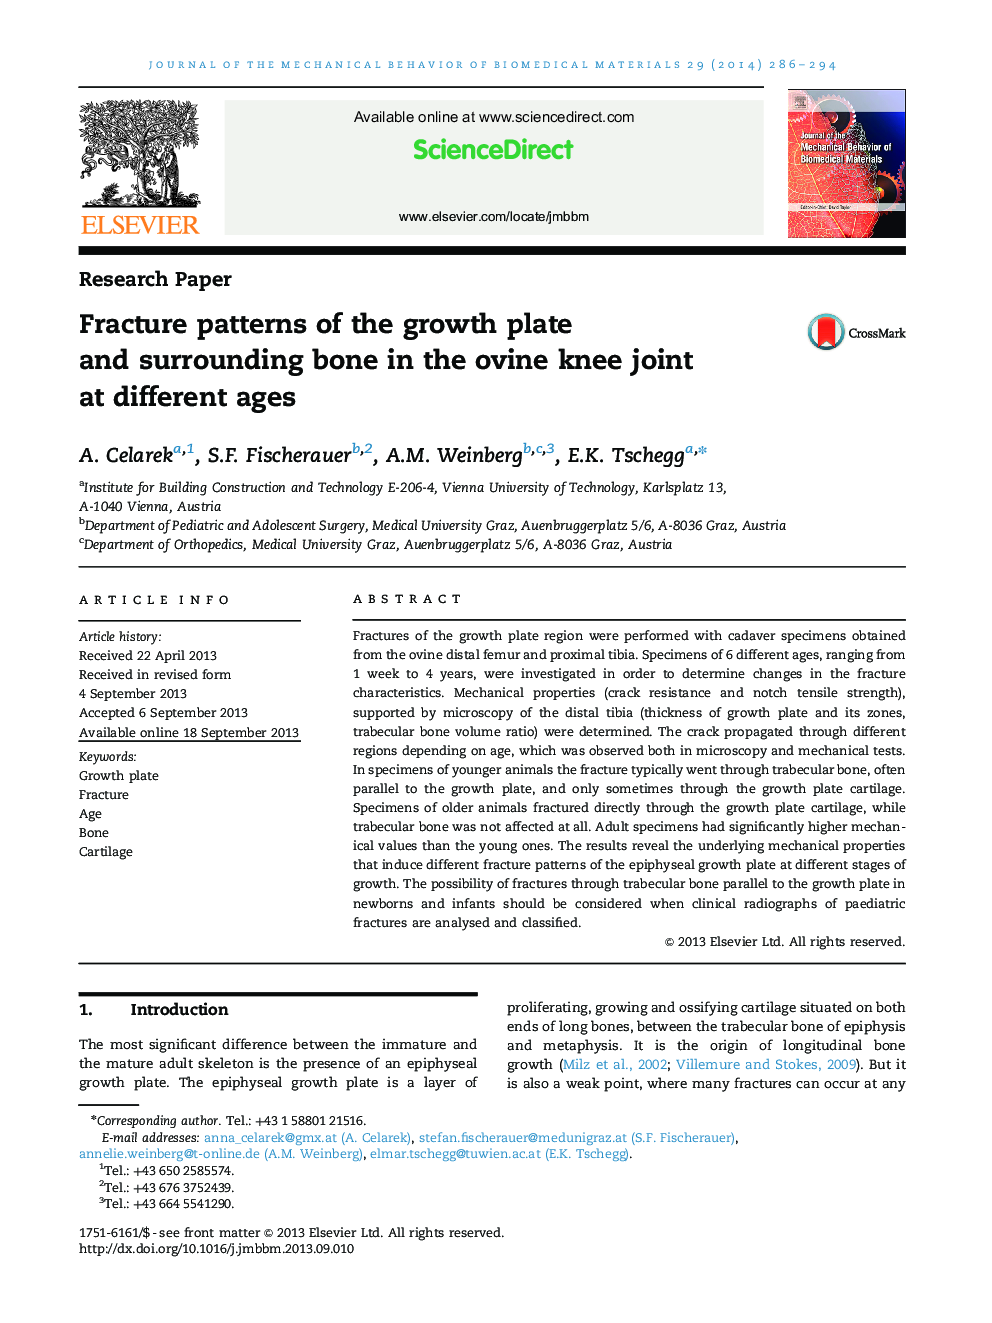 Fracture patterns of the growth plate and surrounding bone in the ovine knee joint at different ages